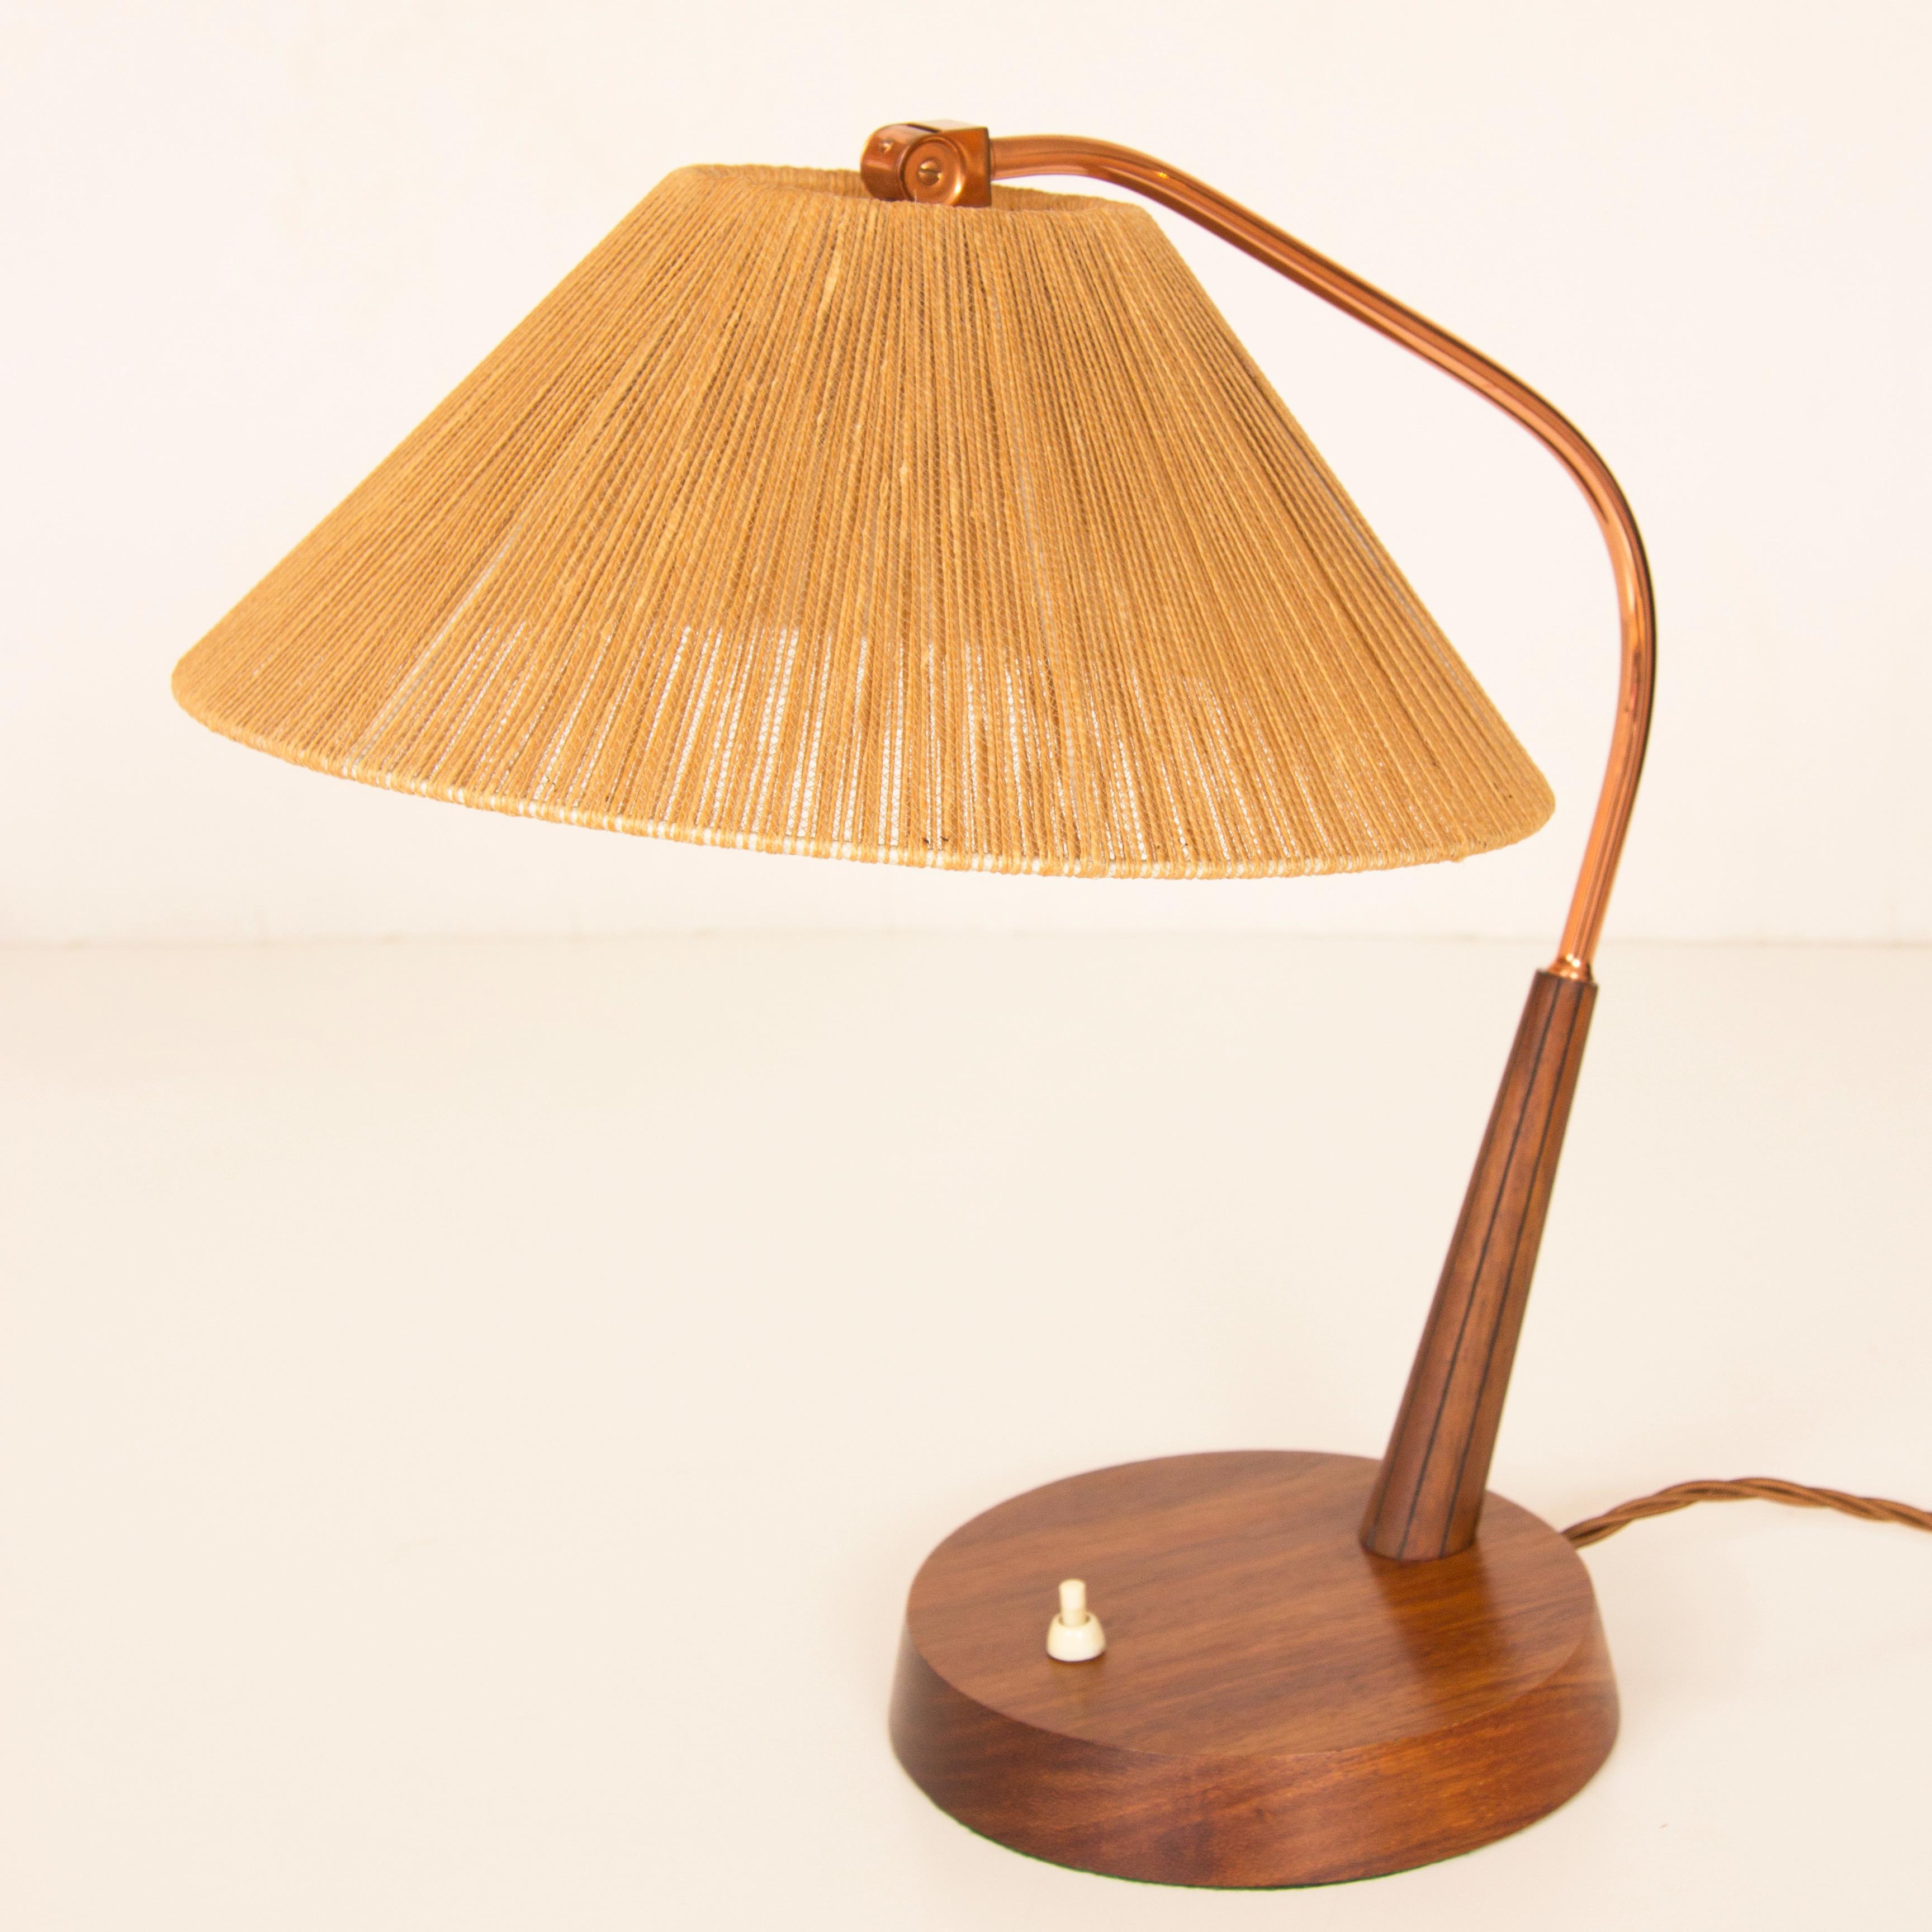 Pair of midcentury table lamps with original jute shades.
A fine pair of table lamps on a turned walnut base, the polished copper arm supported by a reeded and tapered column, the shade can be angled by the ball joint at the top.
Measures: H 43